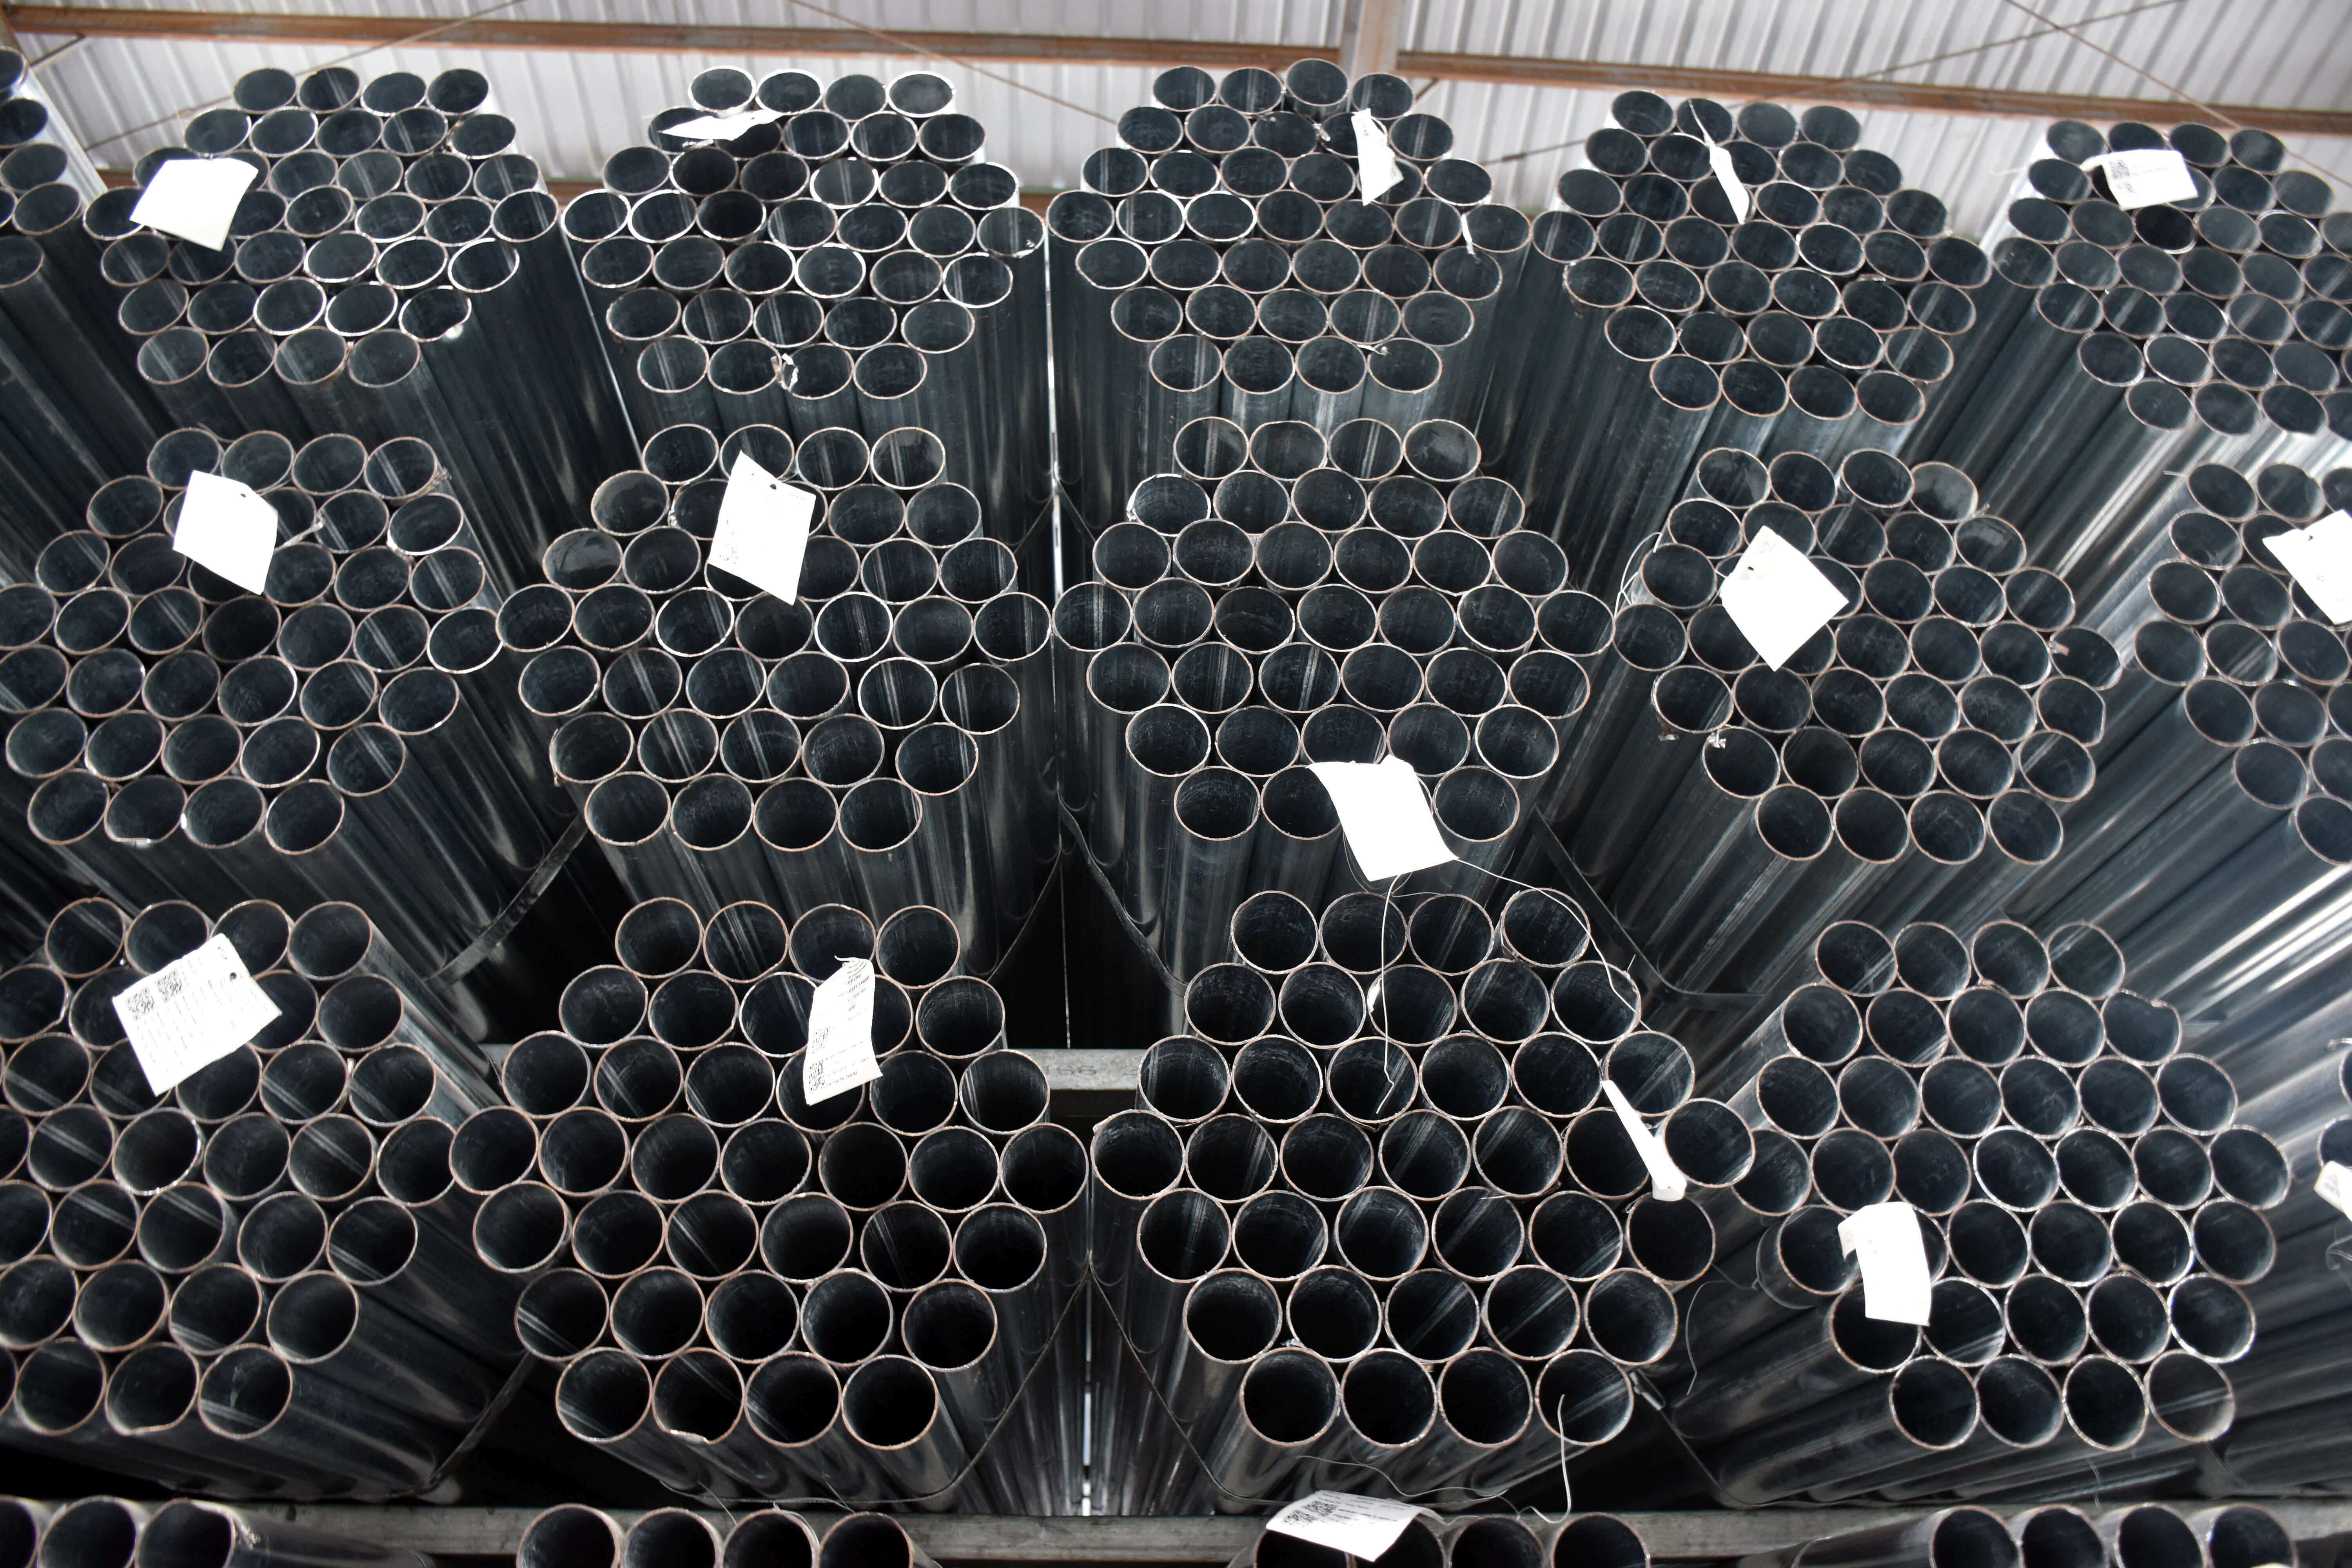 Where to buy steel: Galvanized Steel Pipe